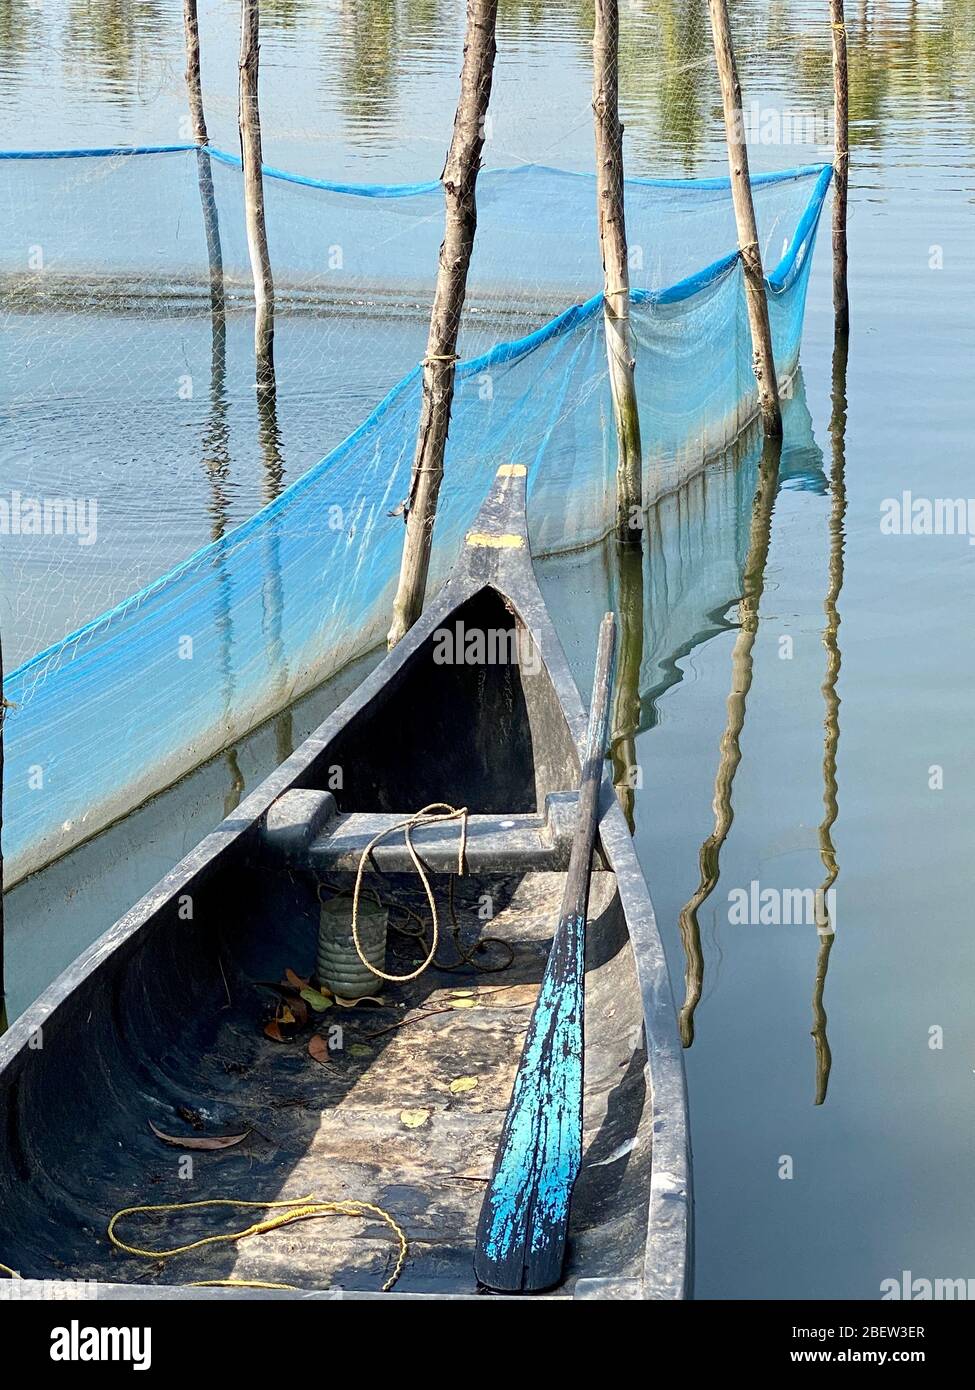 Wooden canoe with blue painted oar docked by a fish farm Stock Photo